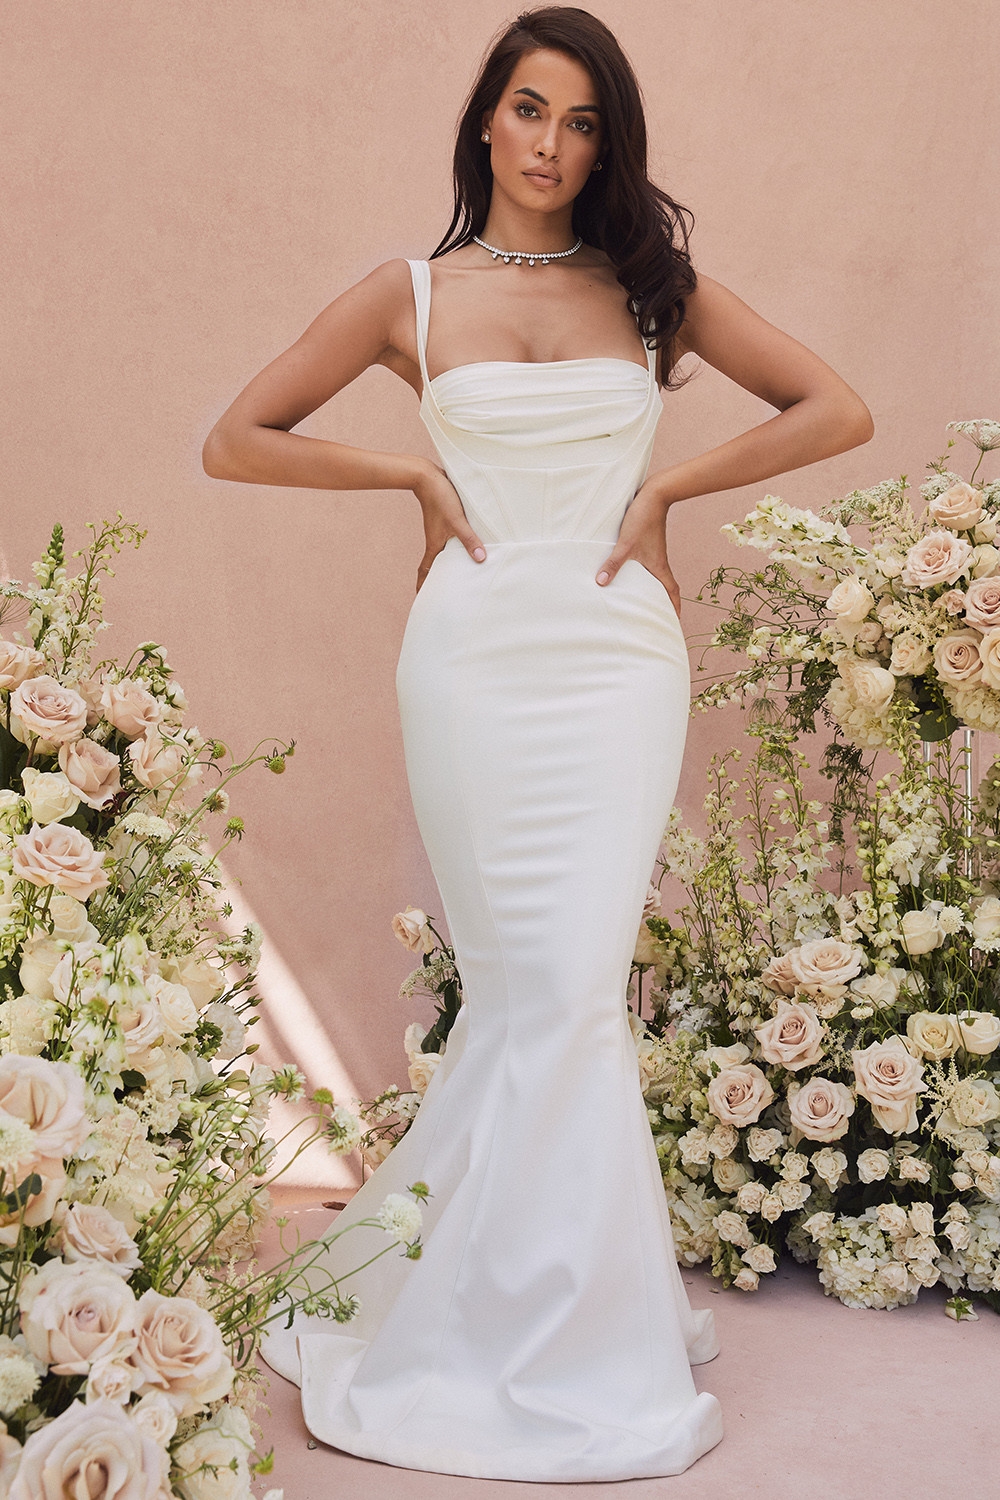 Francoise, Ivory Balconette Corset Bridal Gown - Limited Edition